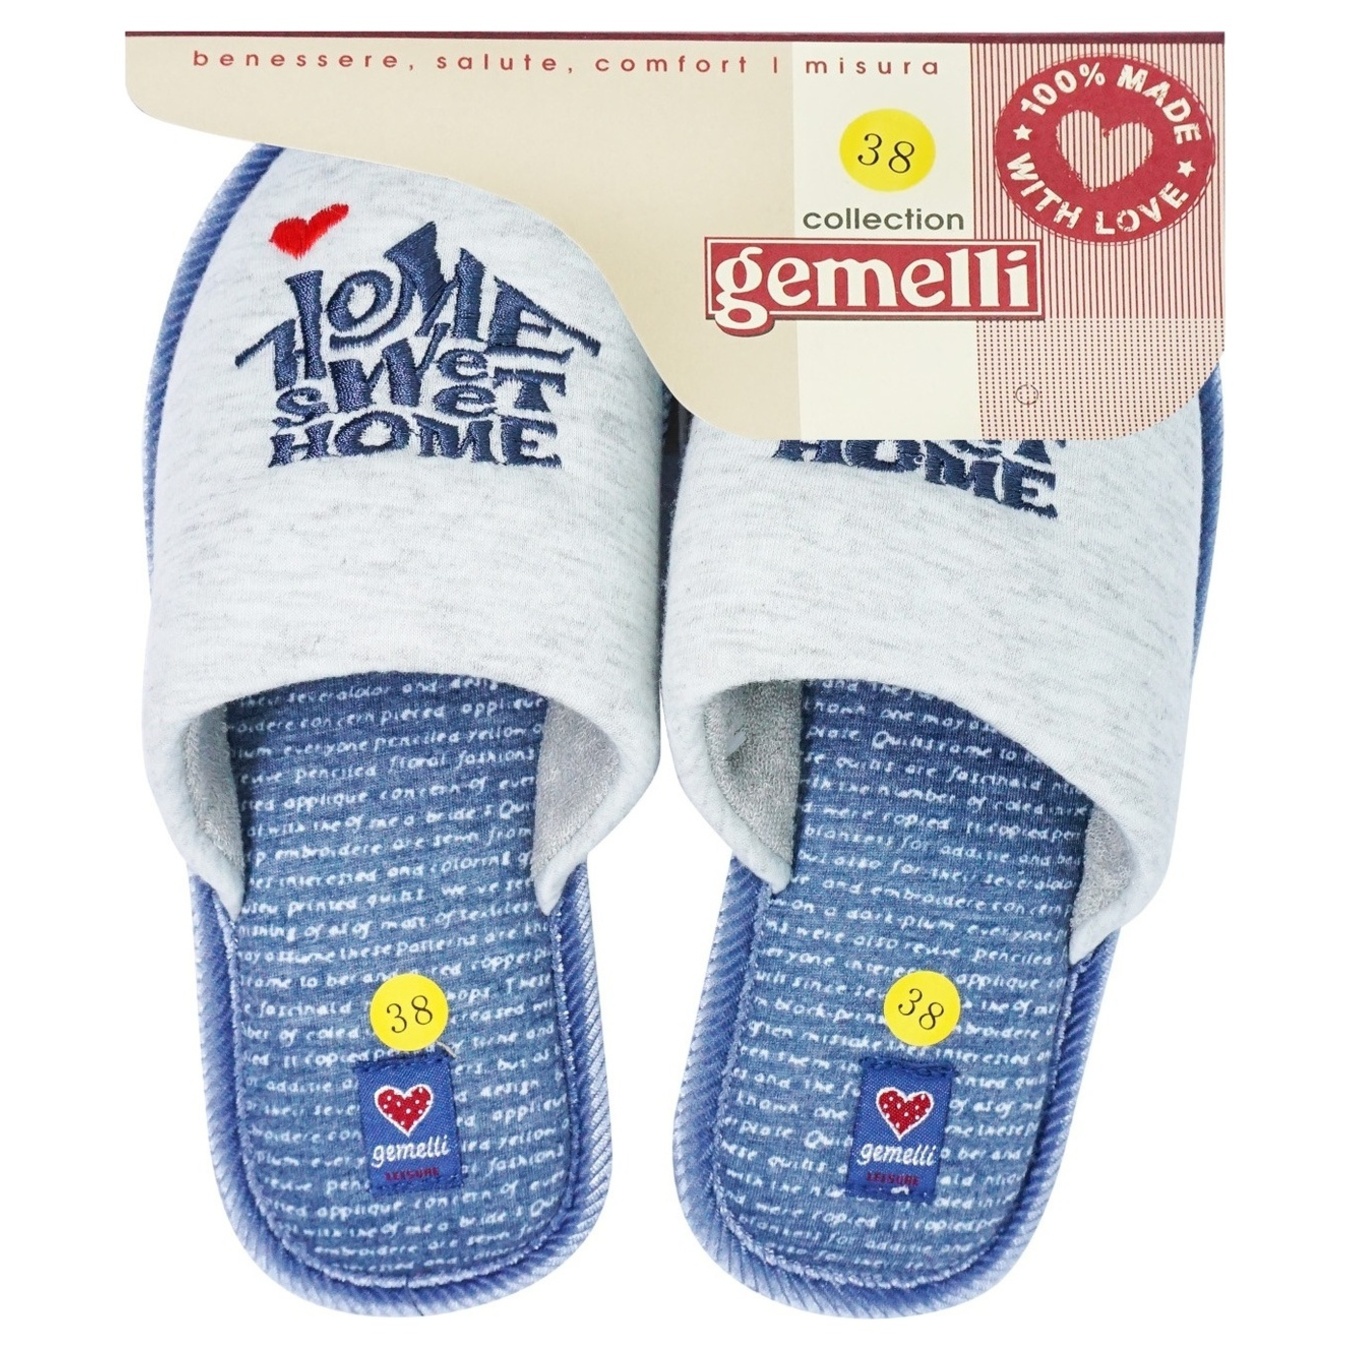 Gemelli House home shoes for women 36-41 years old.